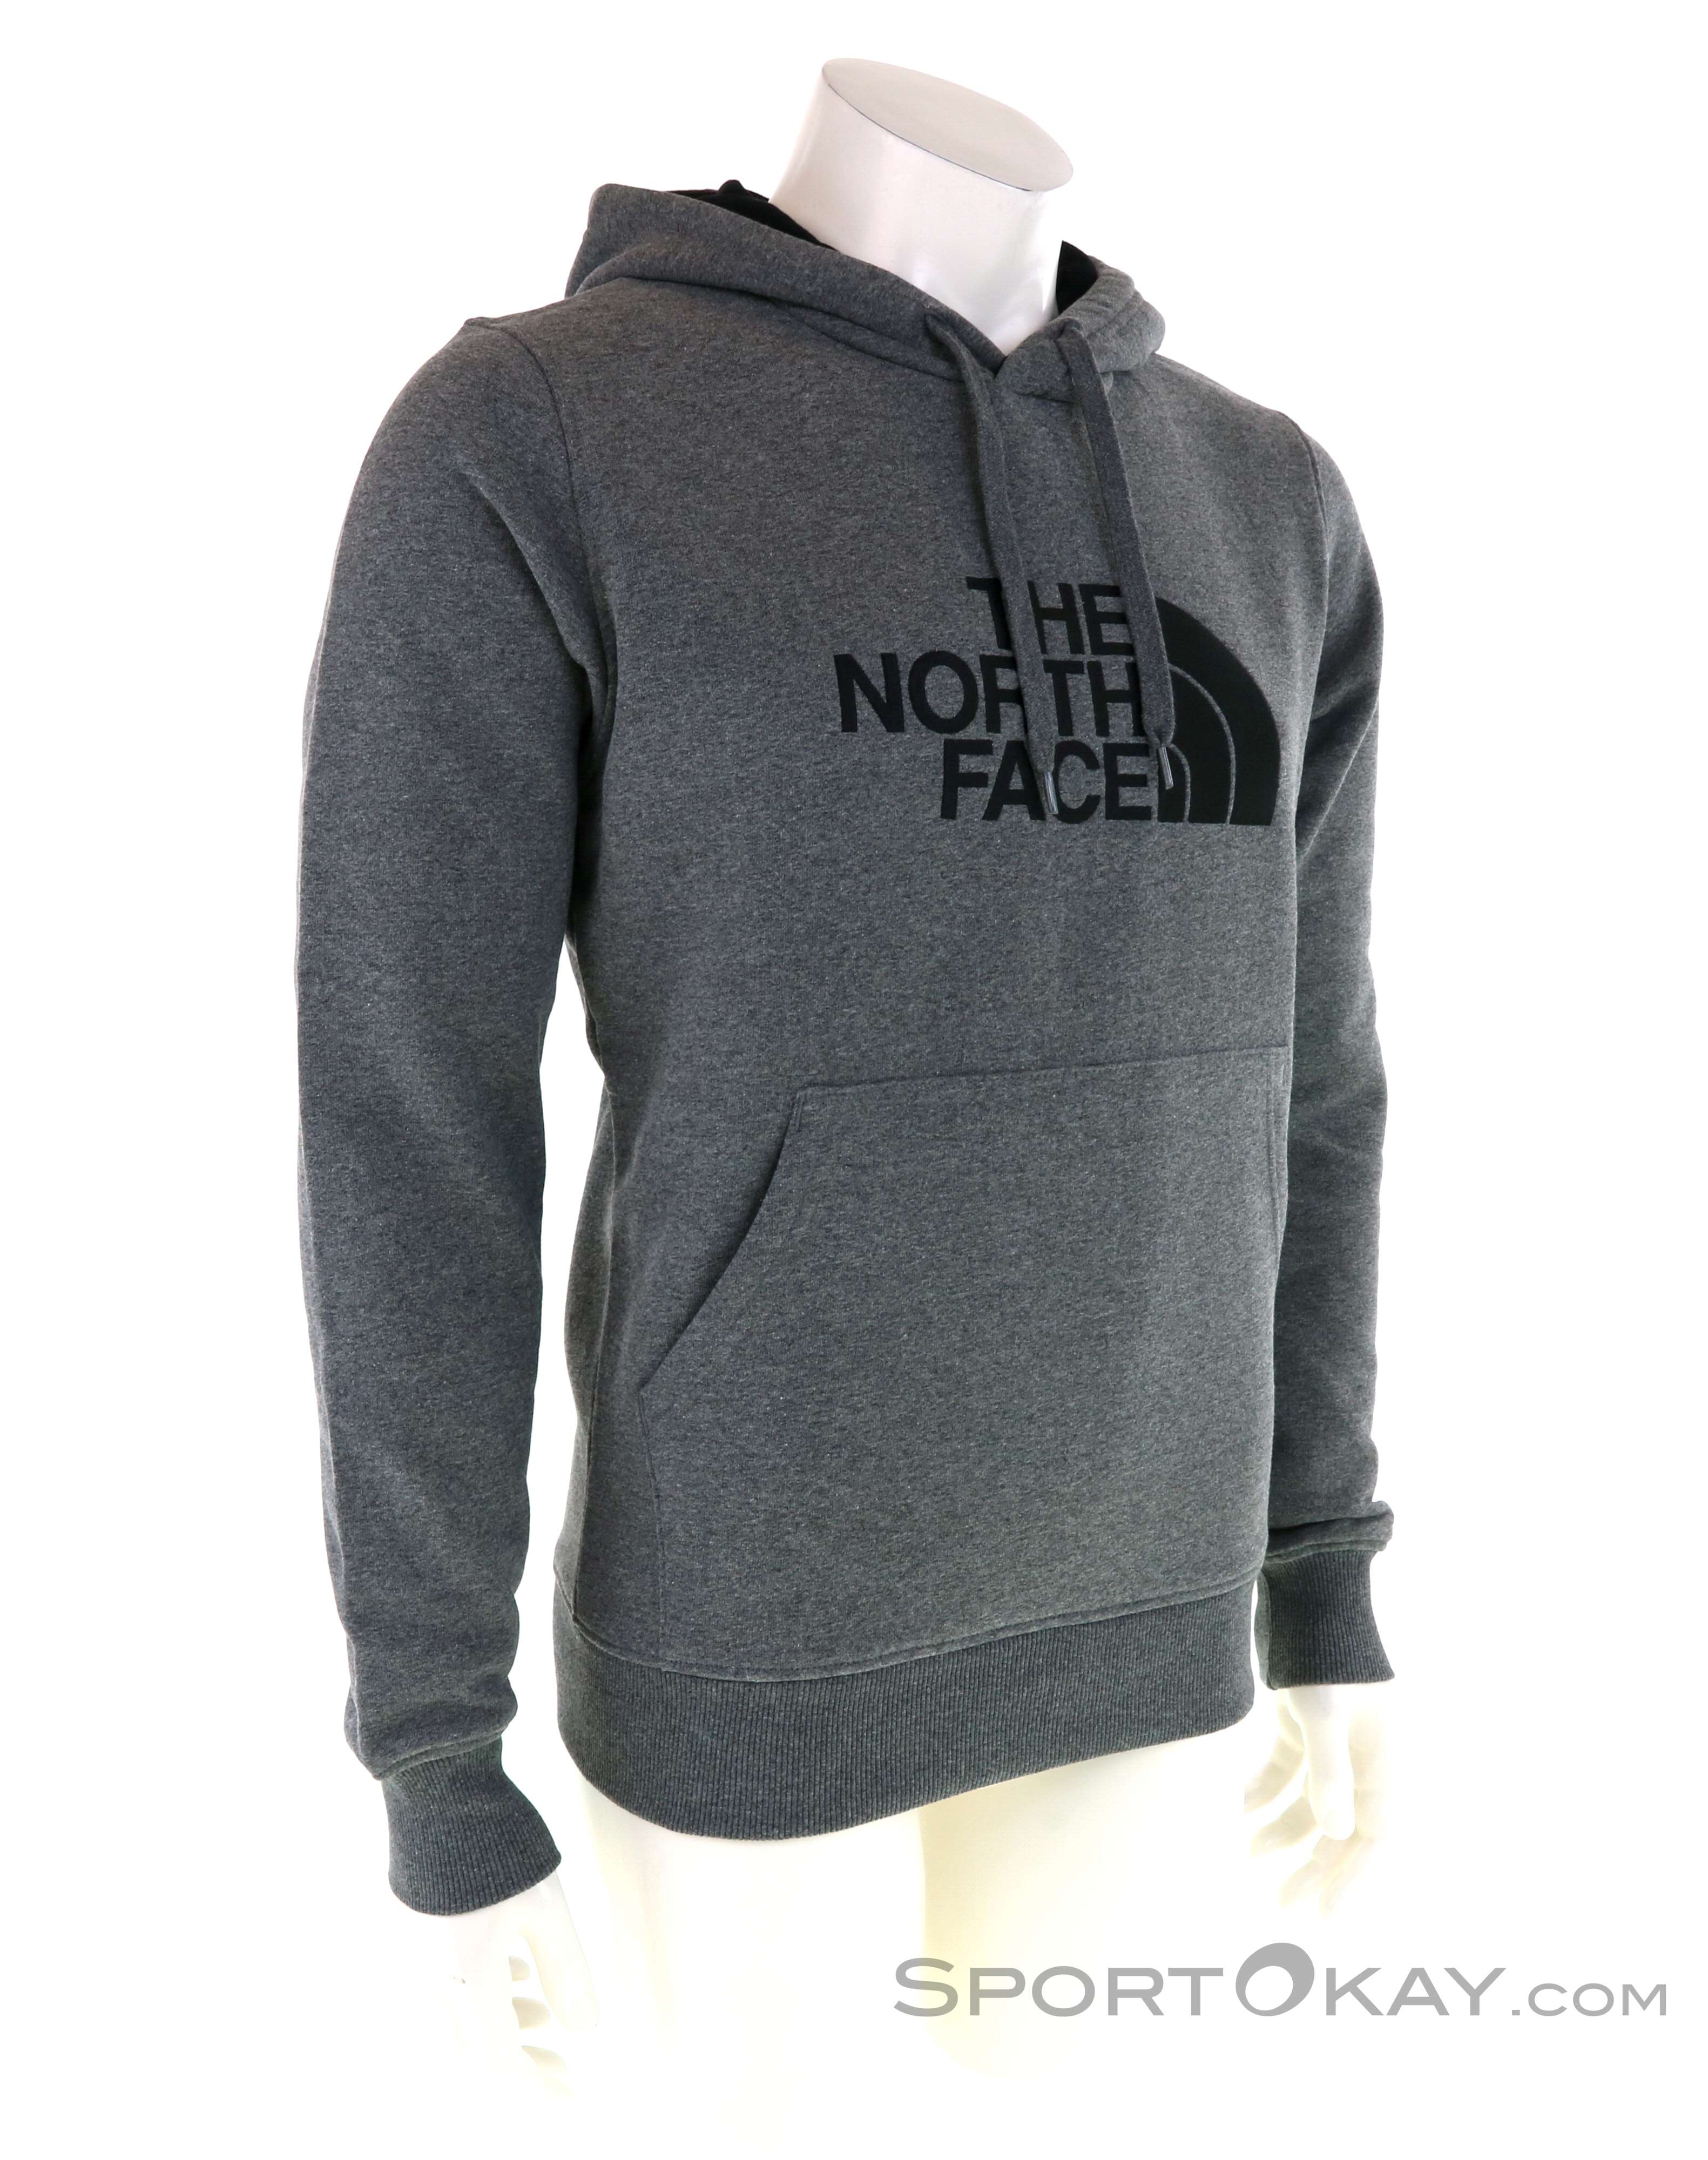 The North Face Drew Hoodie Mens Sweater - Sweaters - Outdoor - Outdoor - All